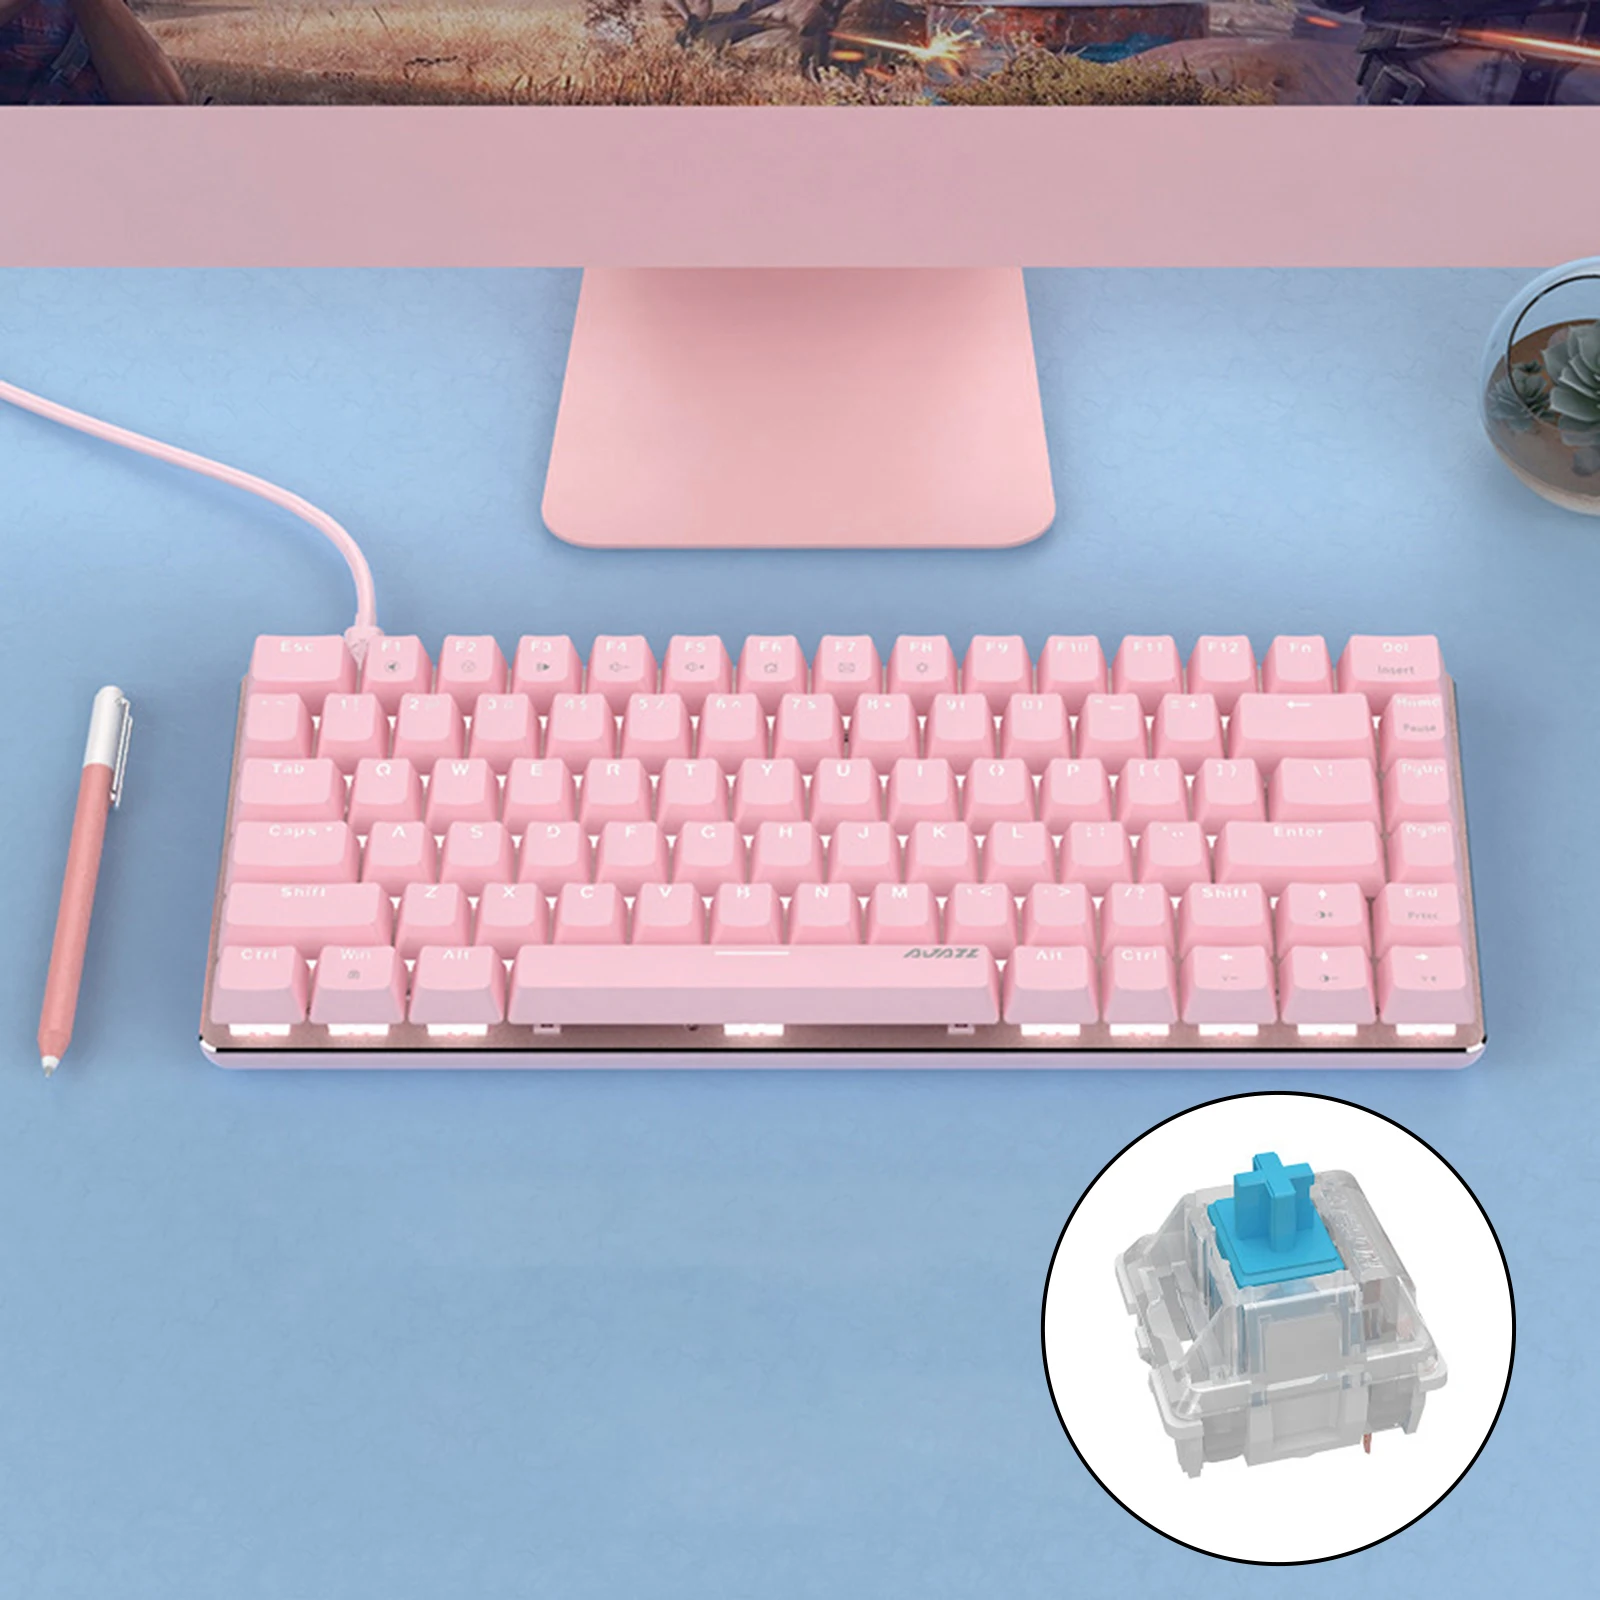 AK33 Mini Pink Switches Wired Keyboard 82 Keys Mini Compact for Games Work Portable